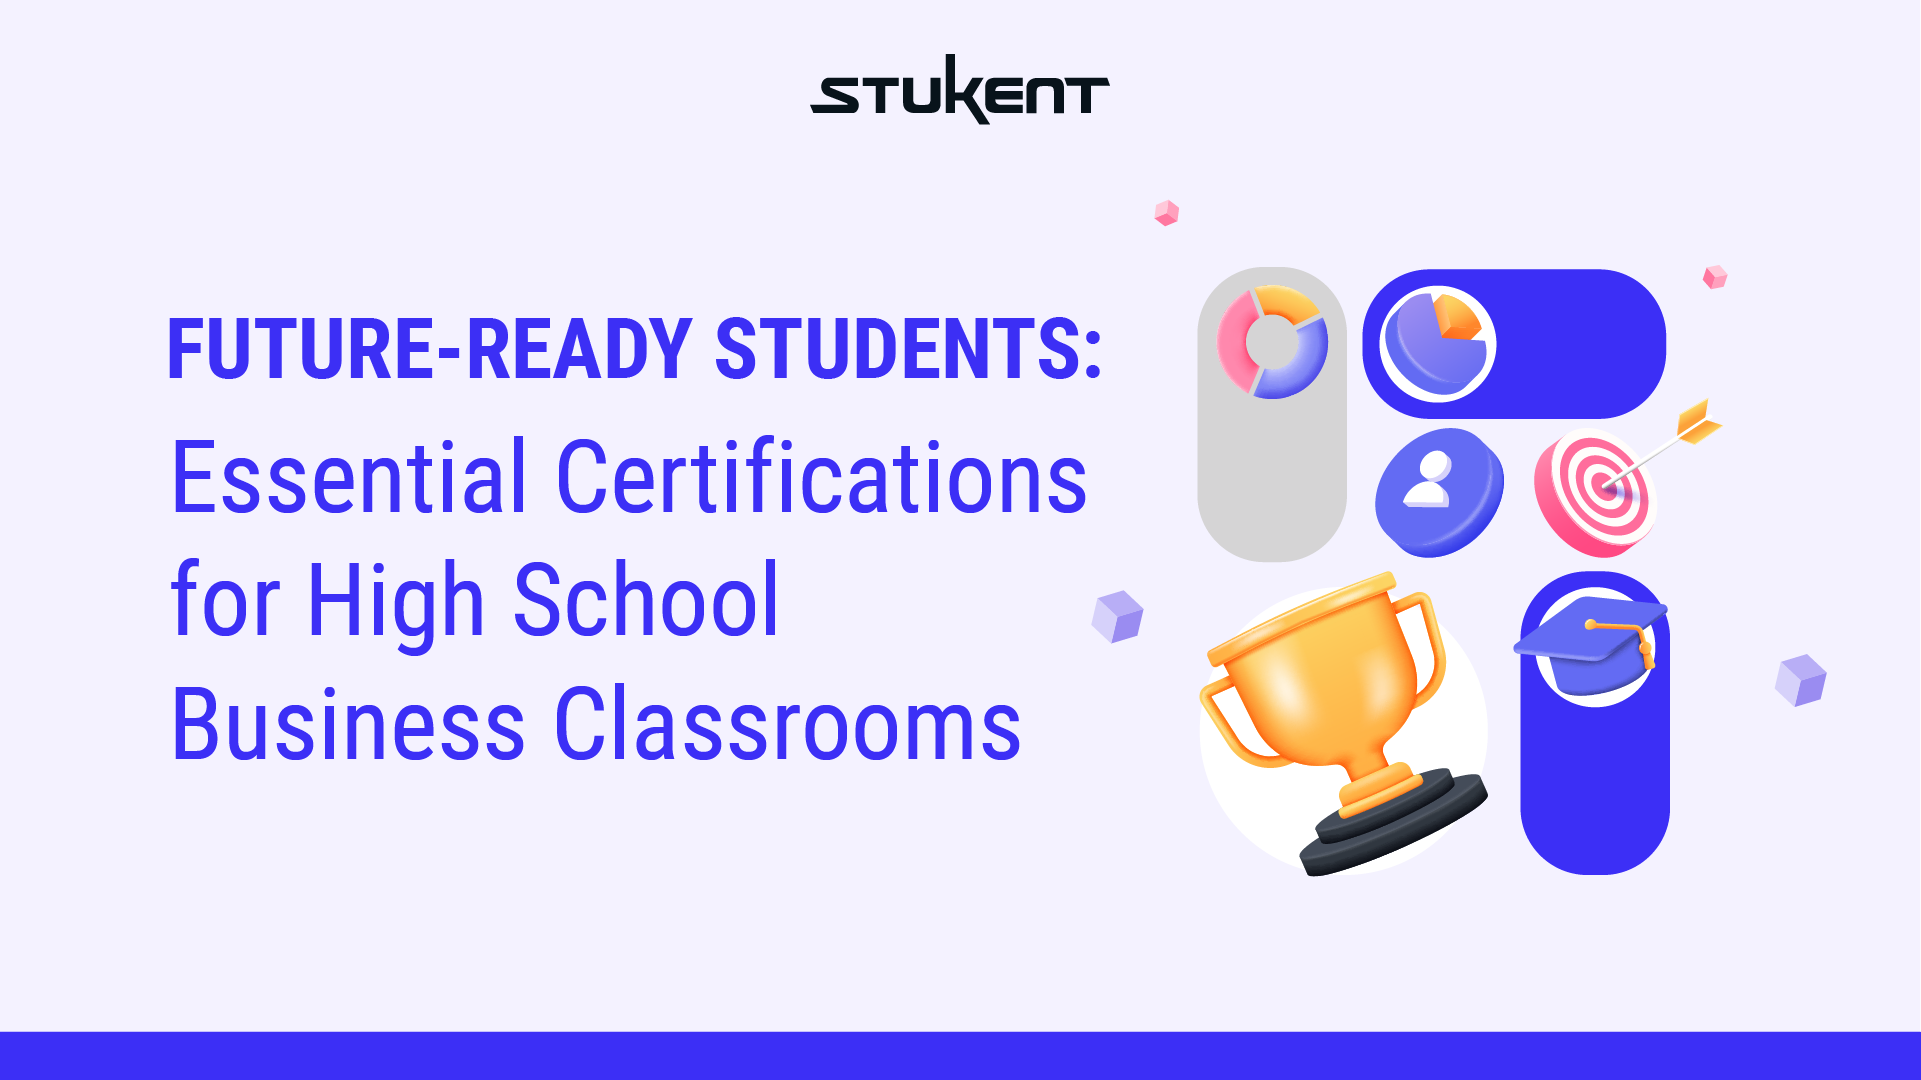 Future-Ready Students: Essential Certifications for High School Business Classrooms